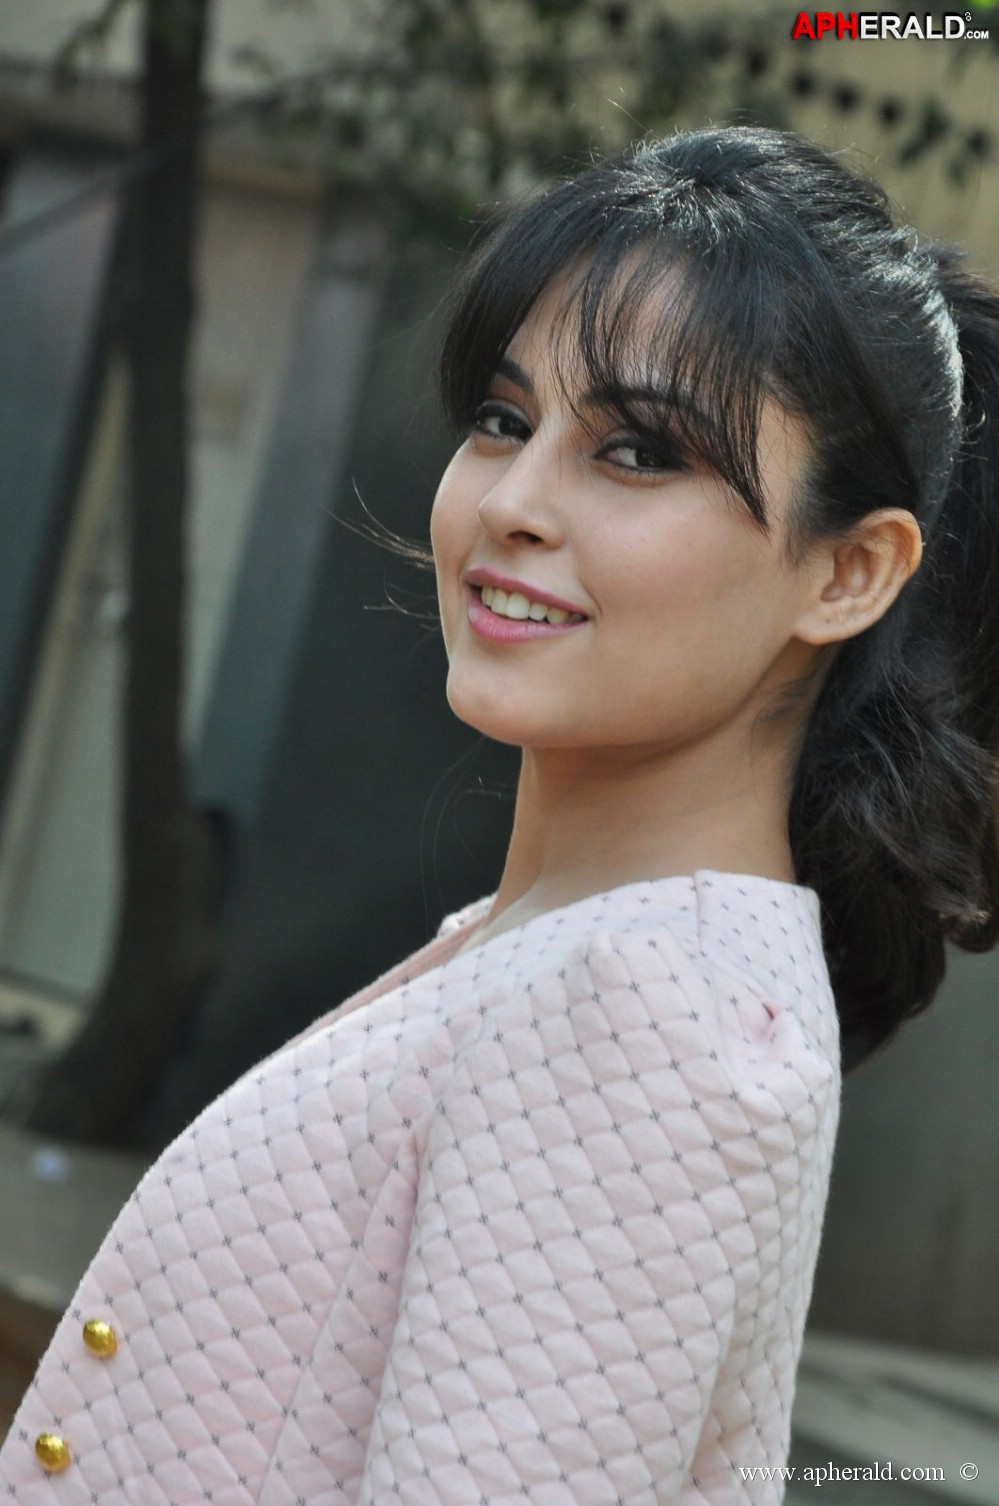 Disha pandey hot pictures